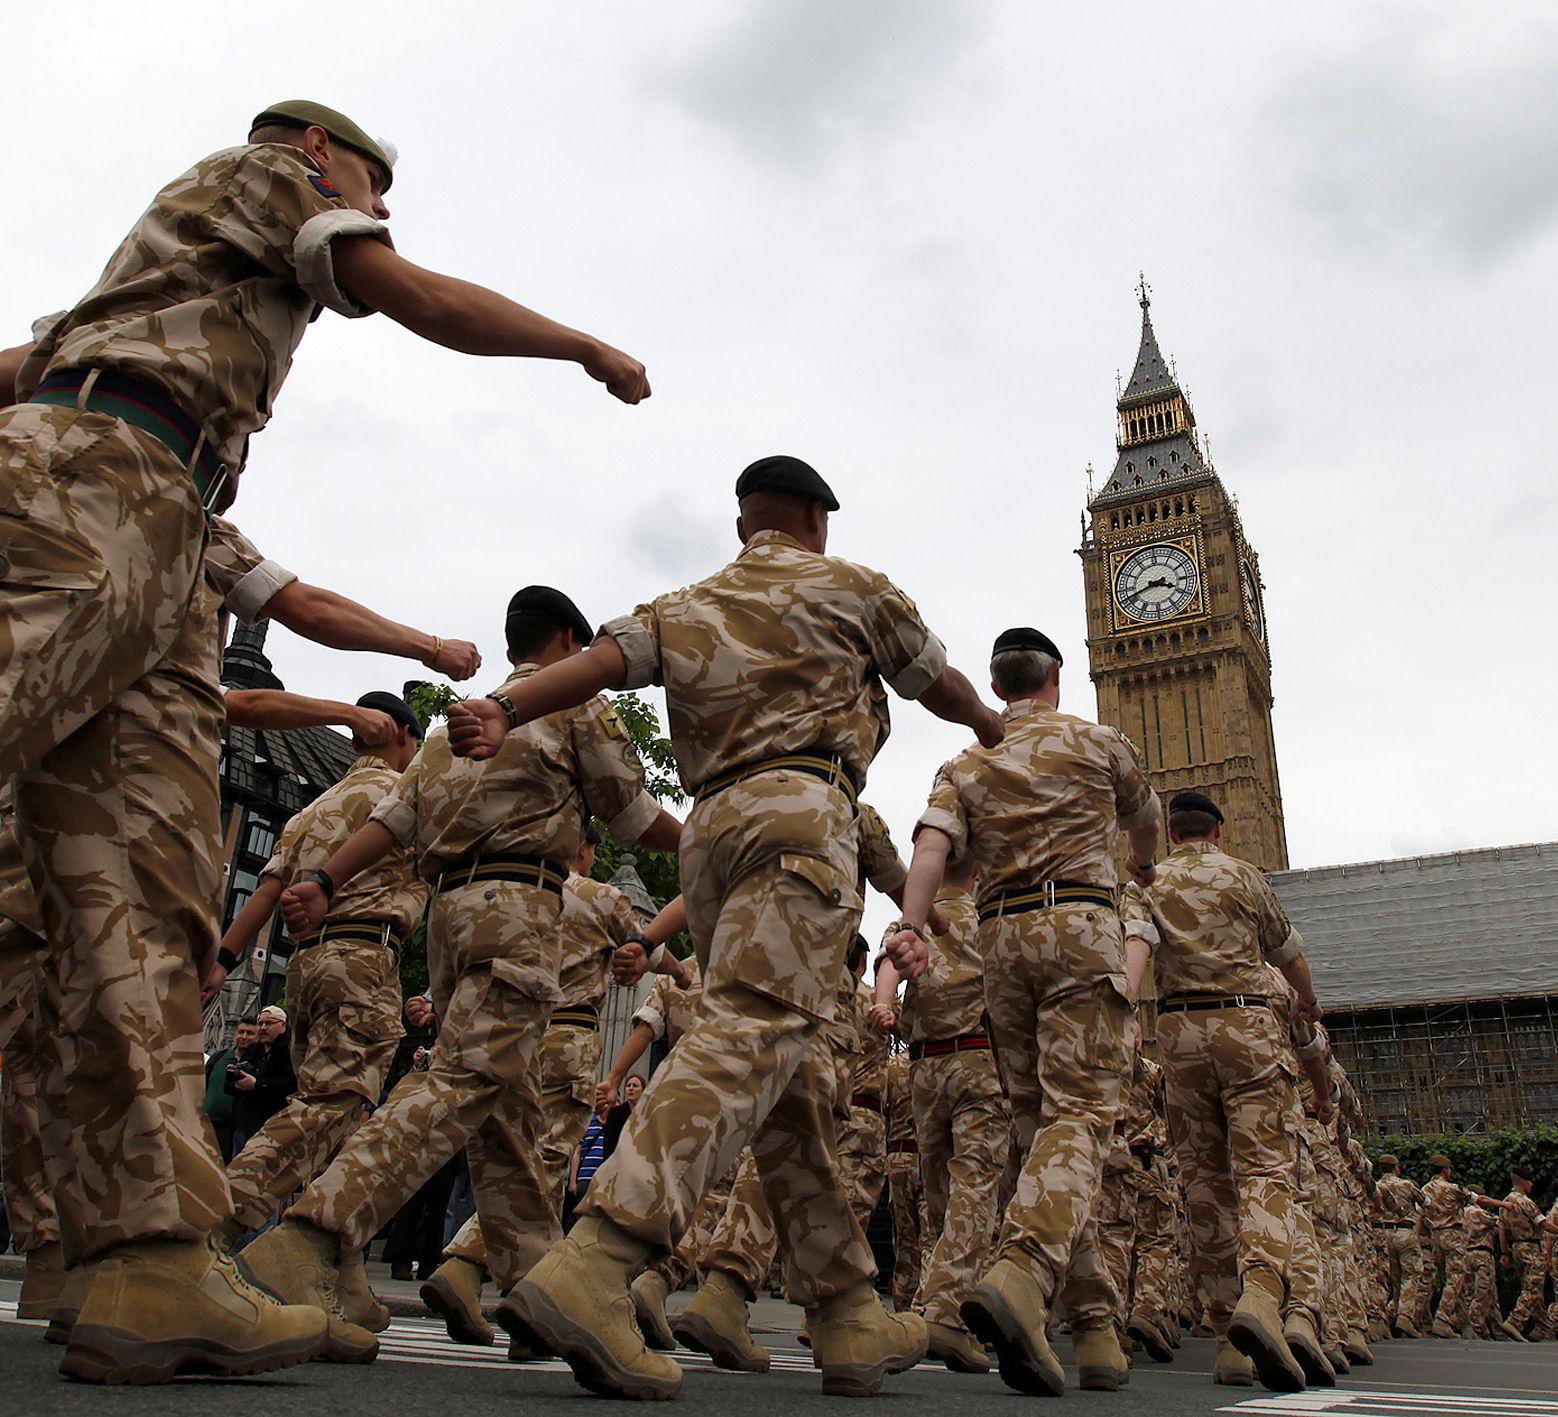 British army soldiers march past parliament